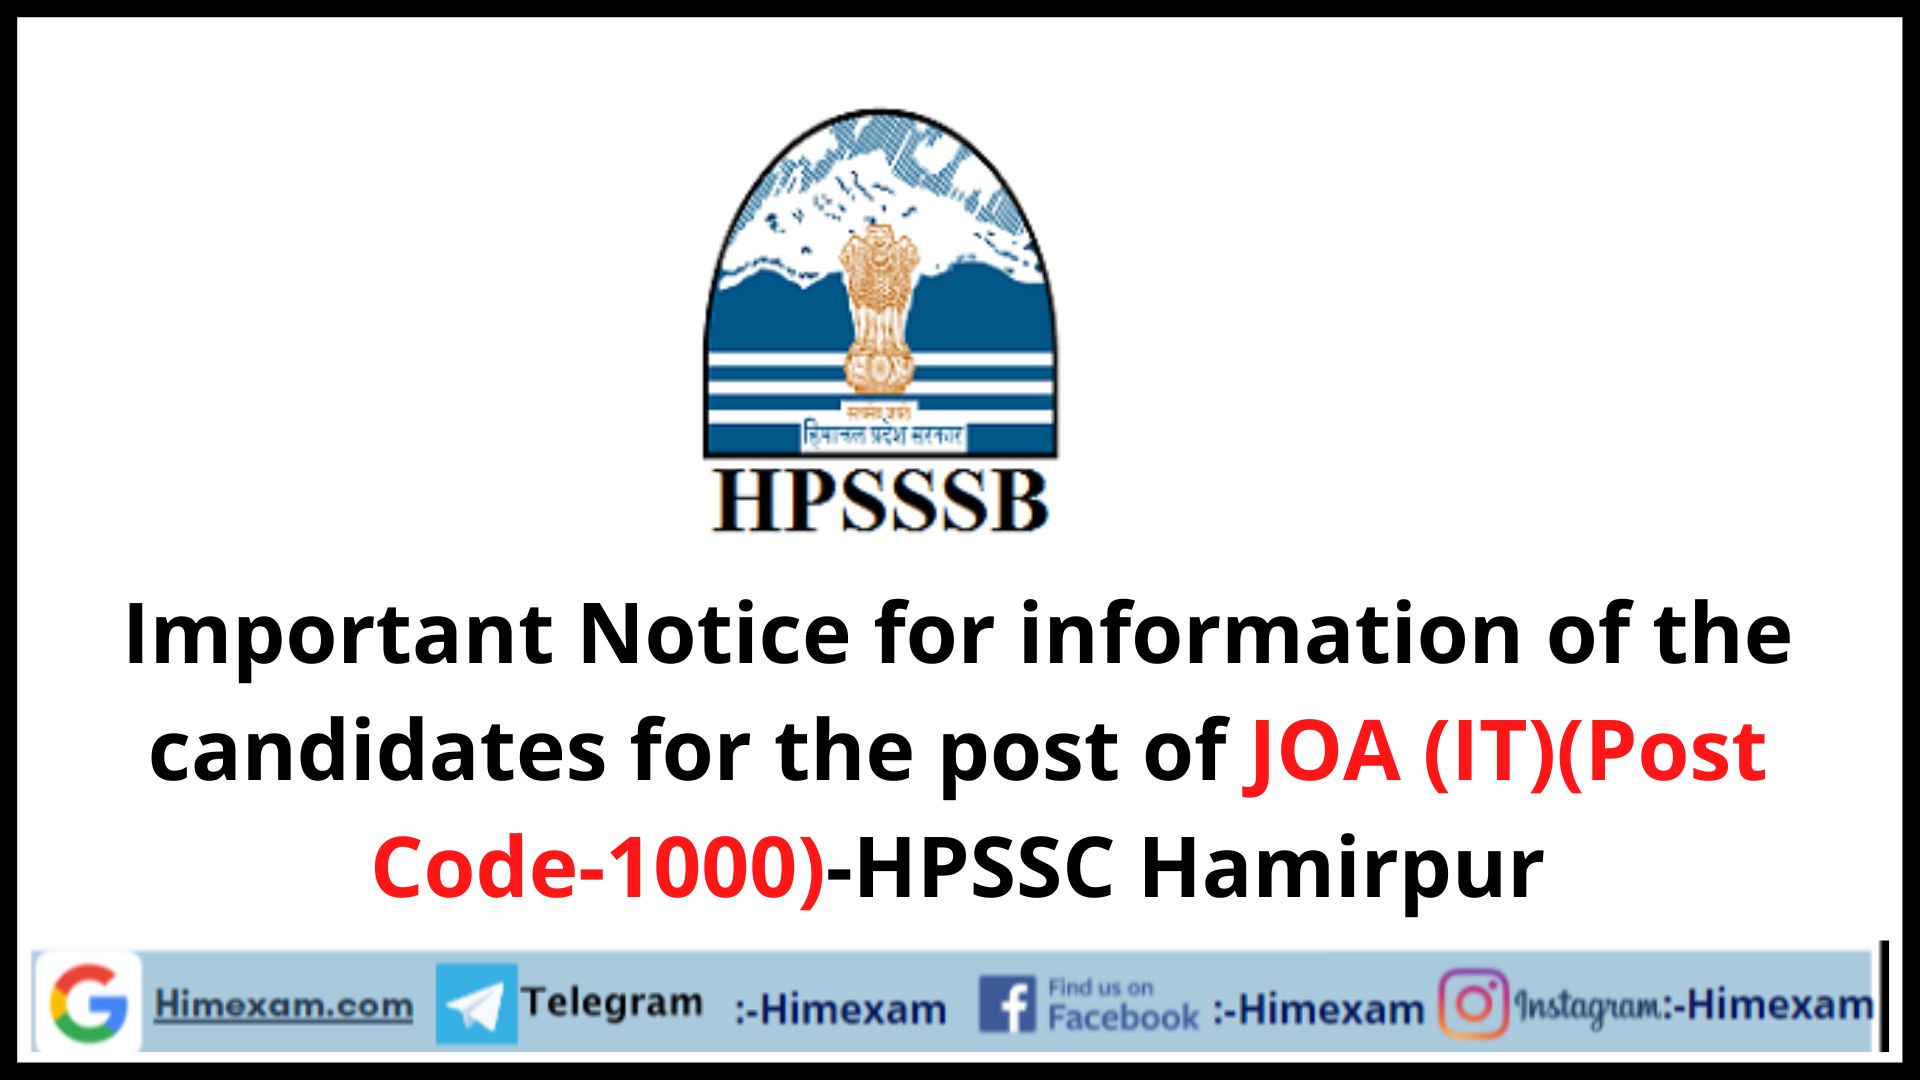 Important Notice for information of the candidates for the post of JOA (IT)(Post Code-1000)-HPSSC Hamirpur